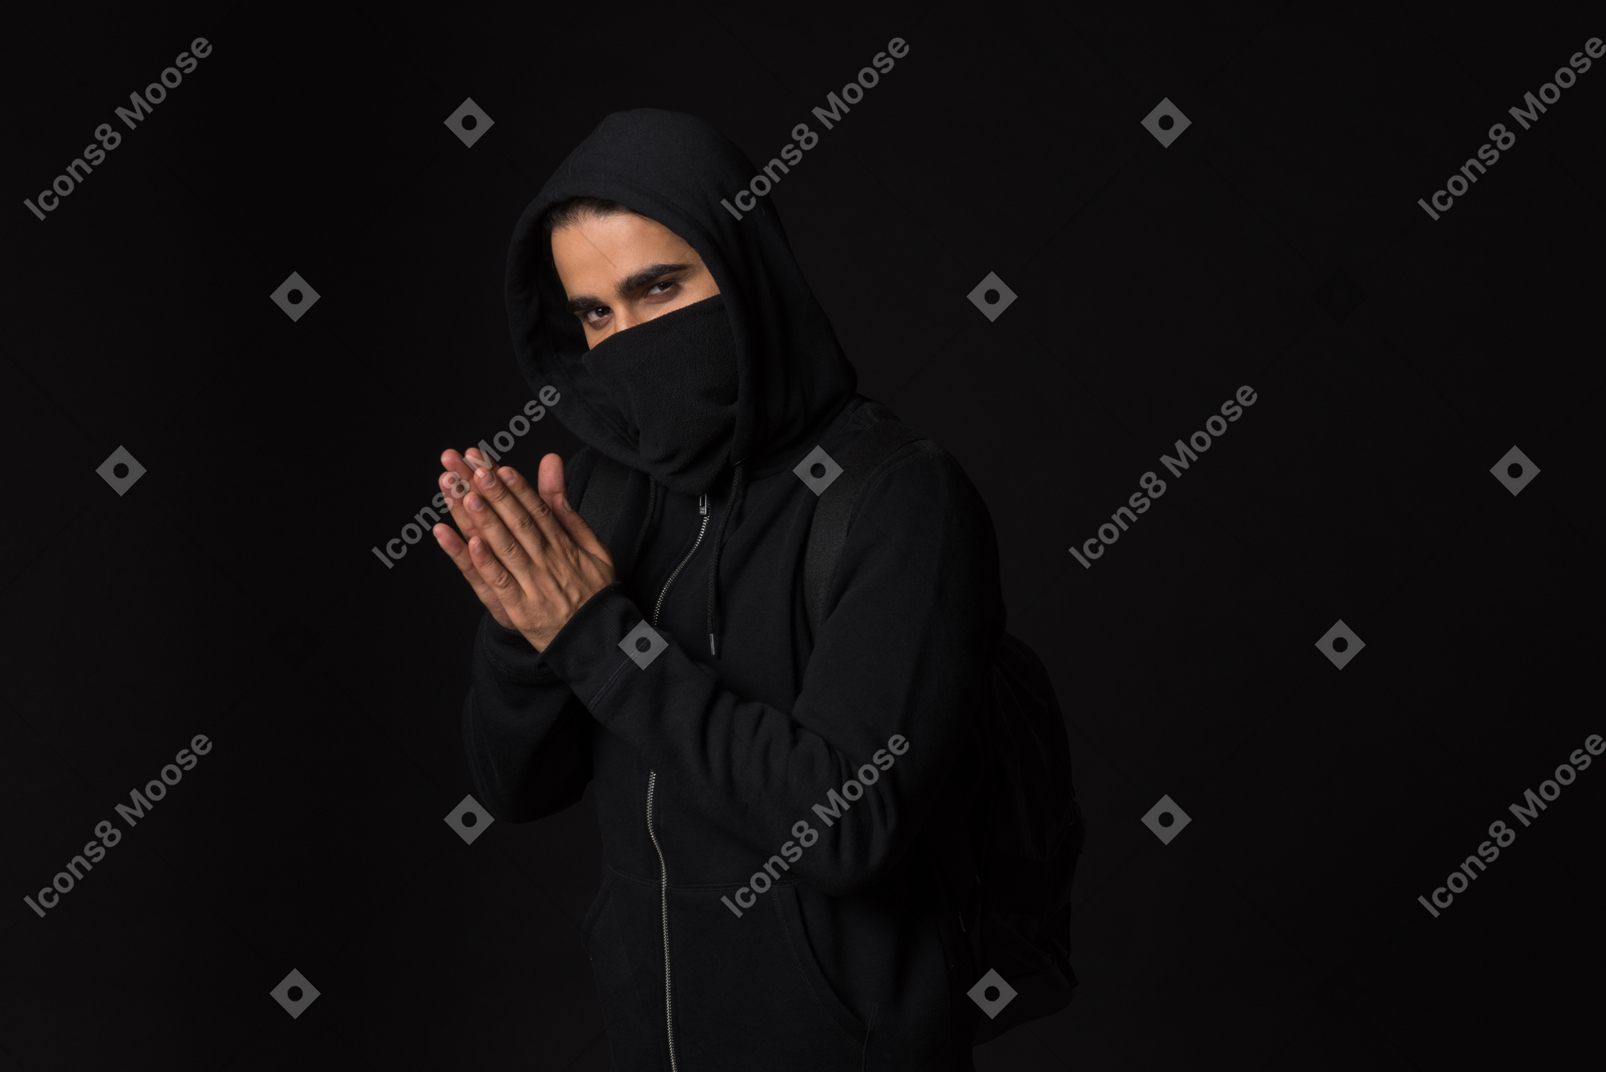 Hacker guy with covered face standing in the dark with hands folded